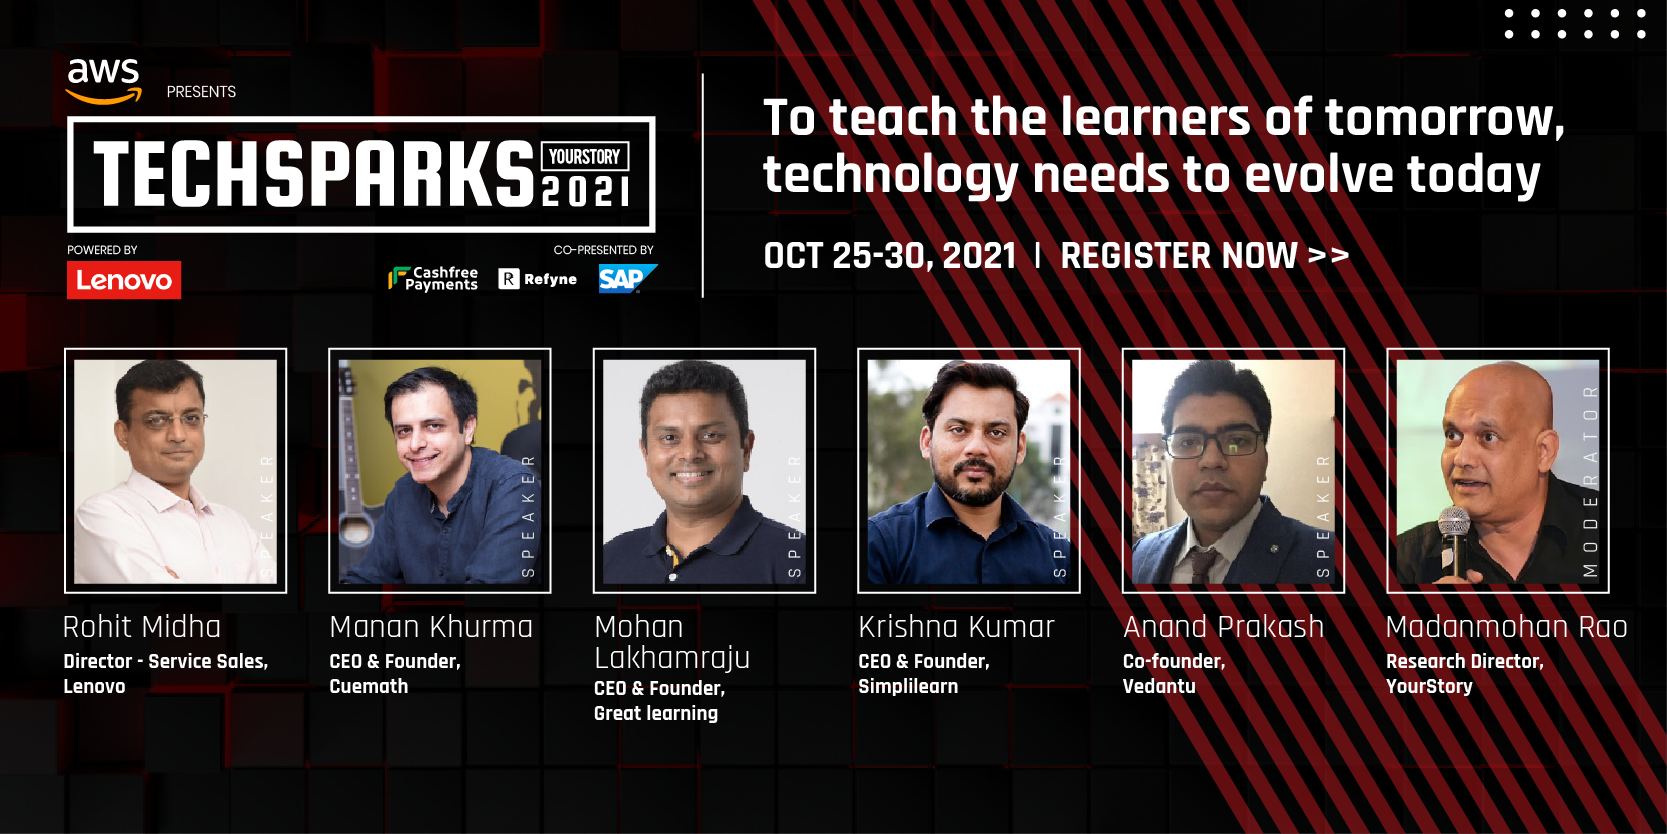 Choice, channel, and collaboration will lead the future of learning, say edtech panellists at TechSparks 2021